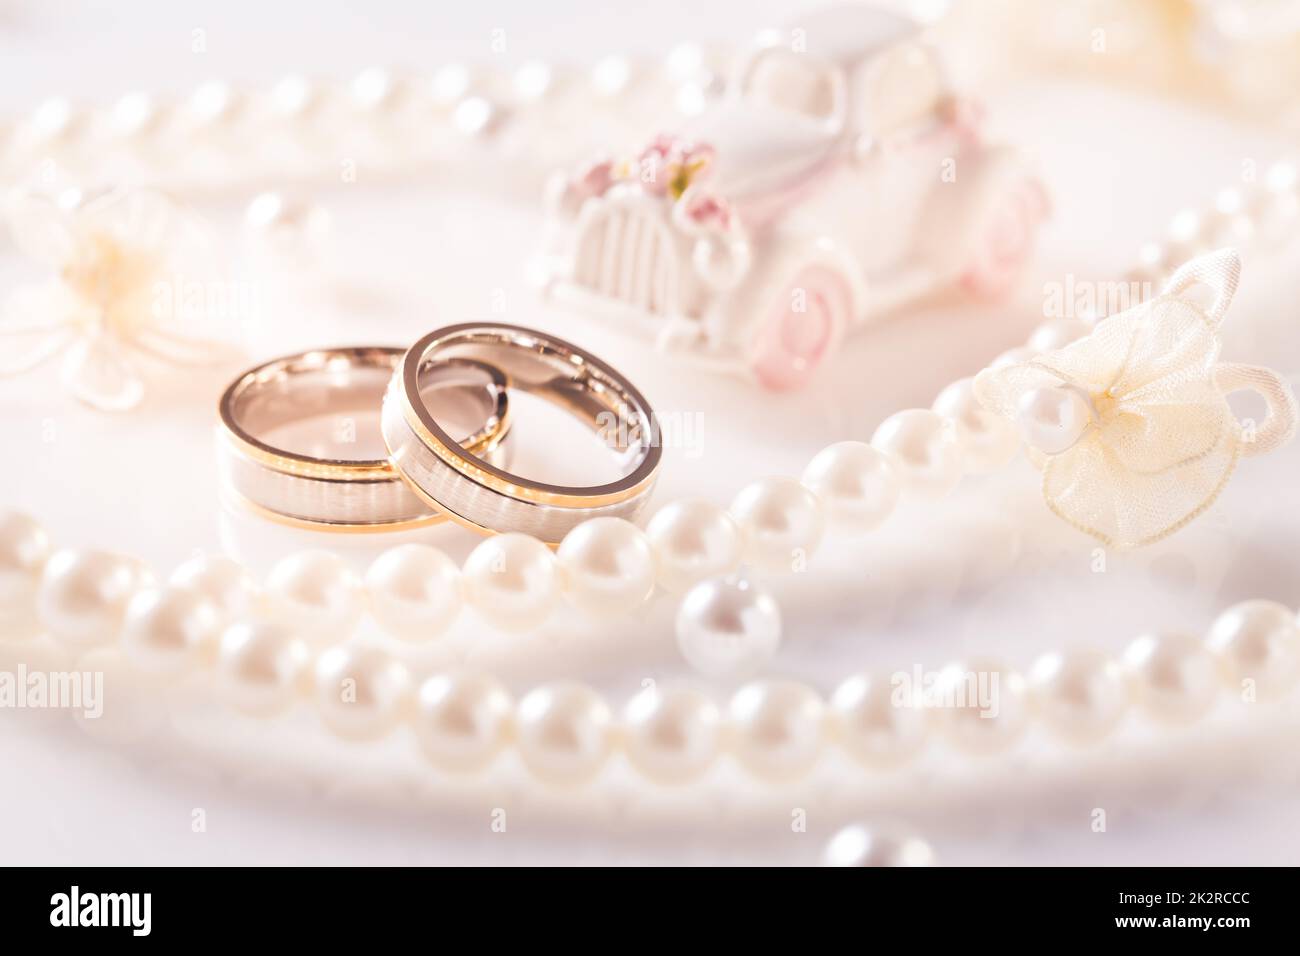 Wedding still life with golden rings and pearl necklace in white Stock Photo